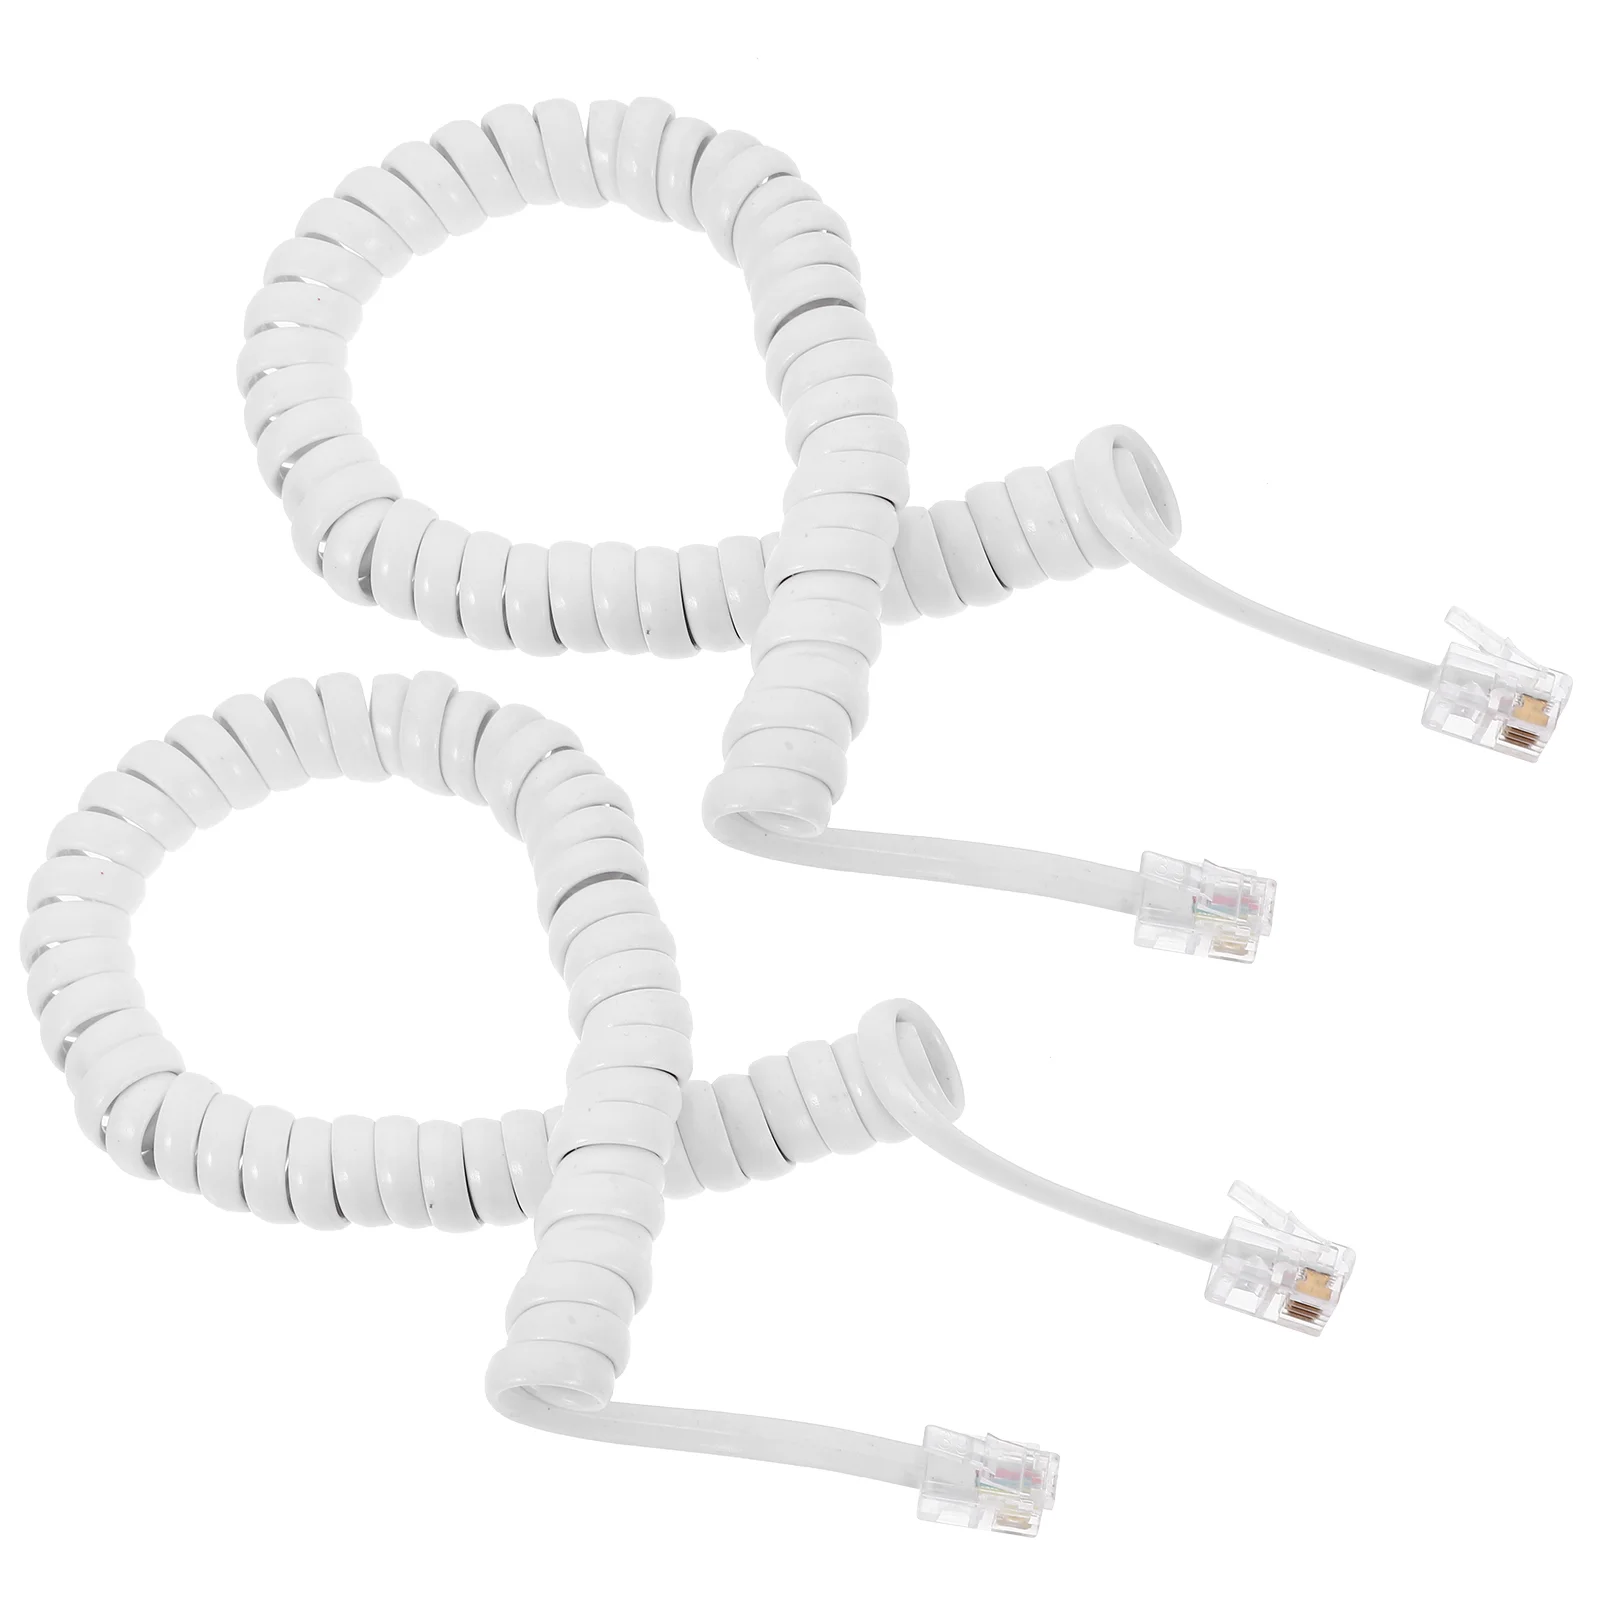 2 Pcs Telephone Cord Landline Spring Spiral Phones Cable Coiled Cords Wire Abs Cables for Accessory